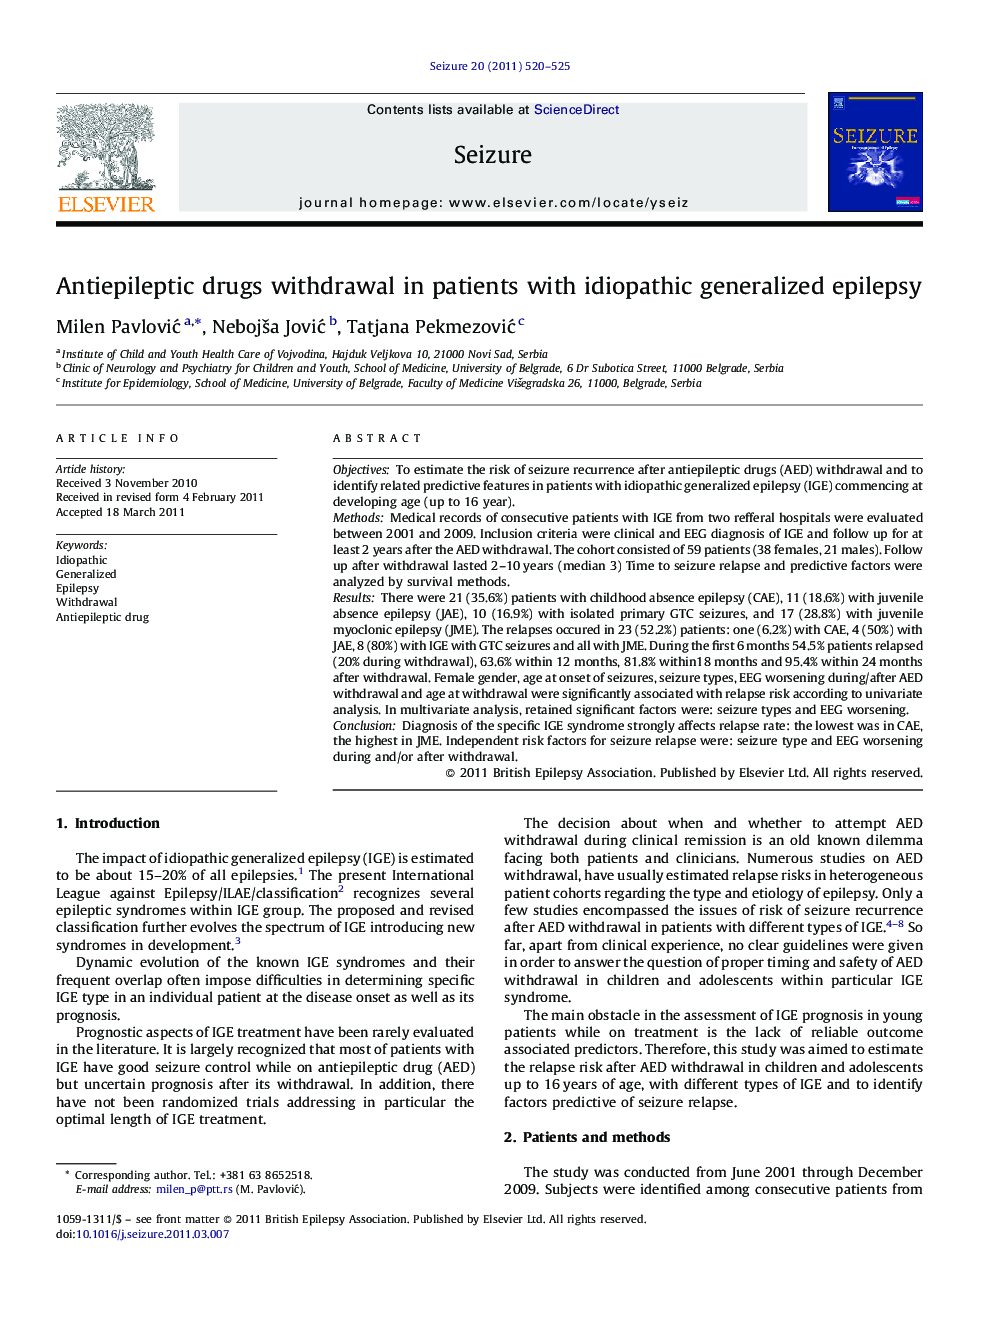 Antiepileptic drugs withdrawal in patients with idiopathic generalized epilepsy